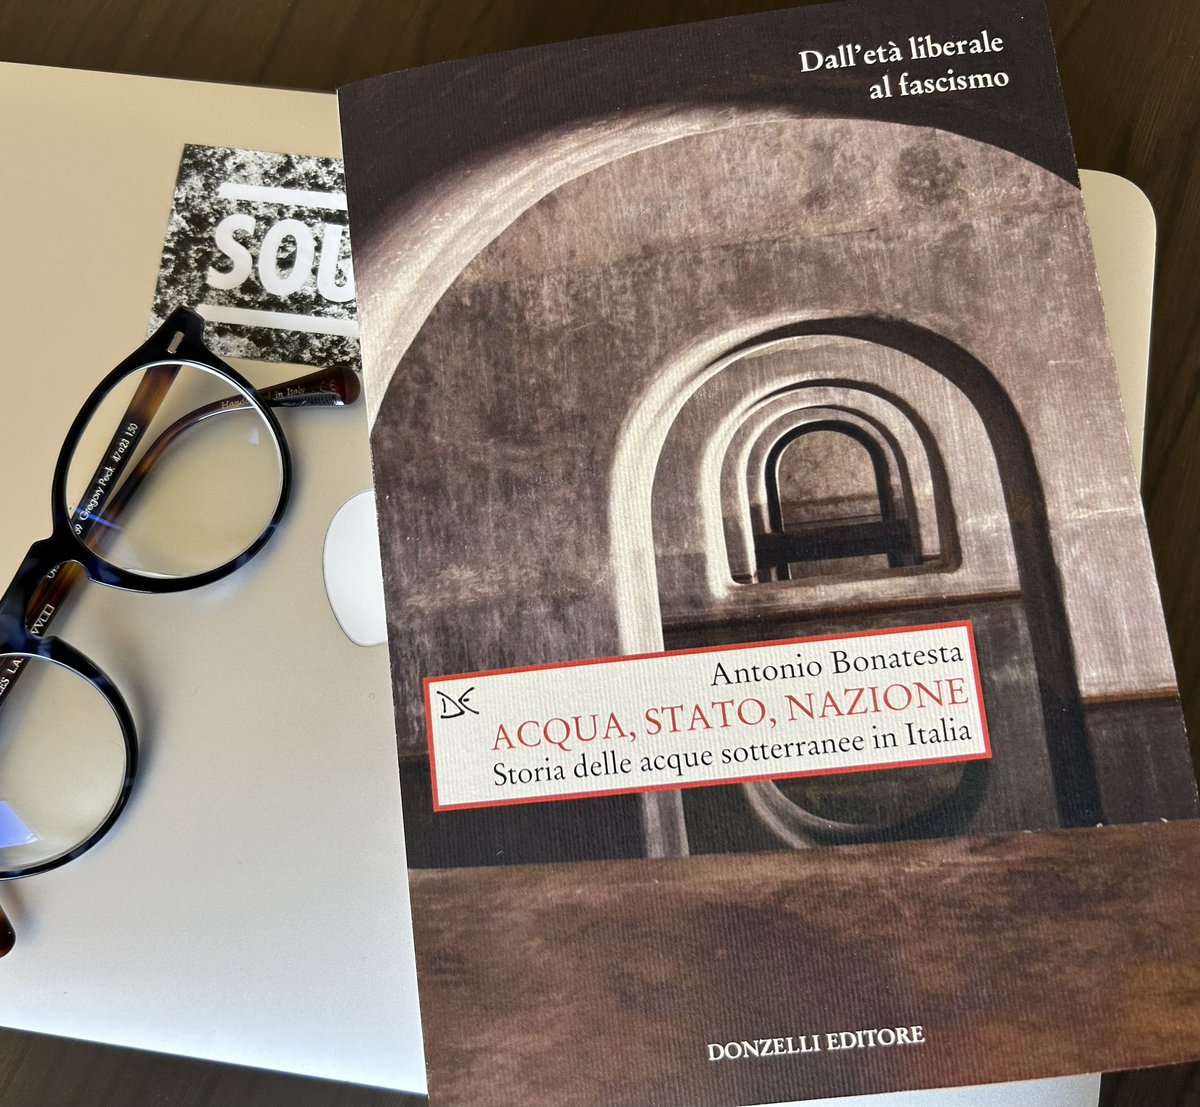 Finally on my desk!
@DonzelliEditore #groundwater #groundwaterhistory #waterhistory #environmentalhistory